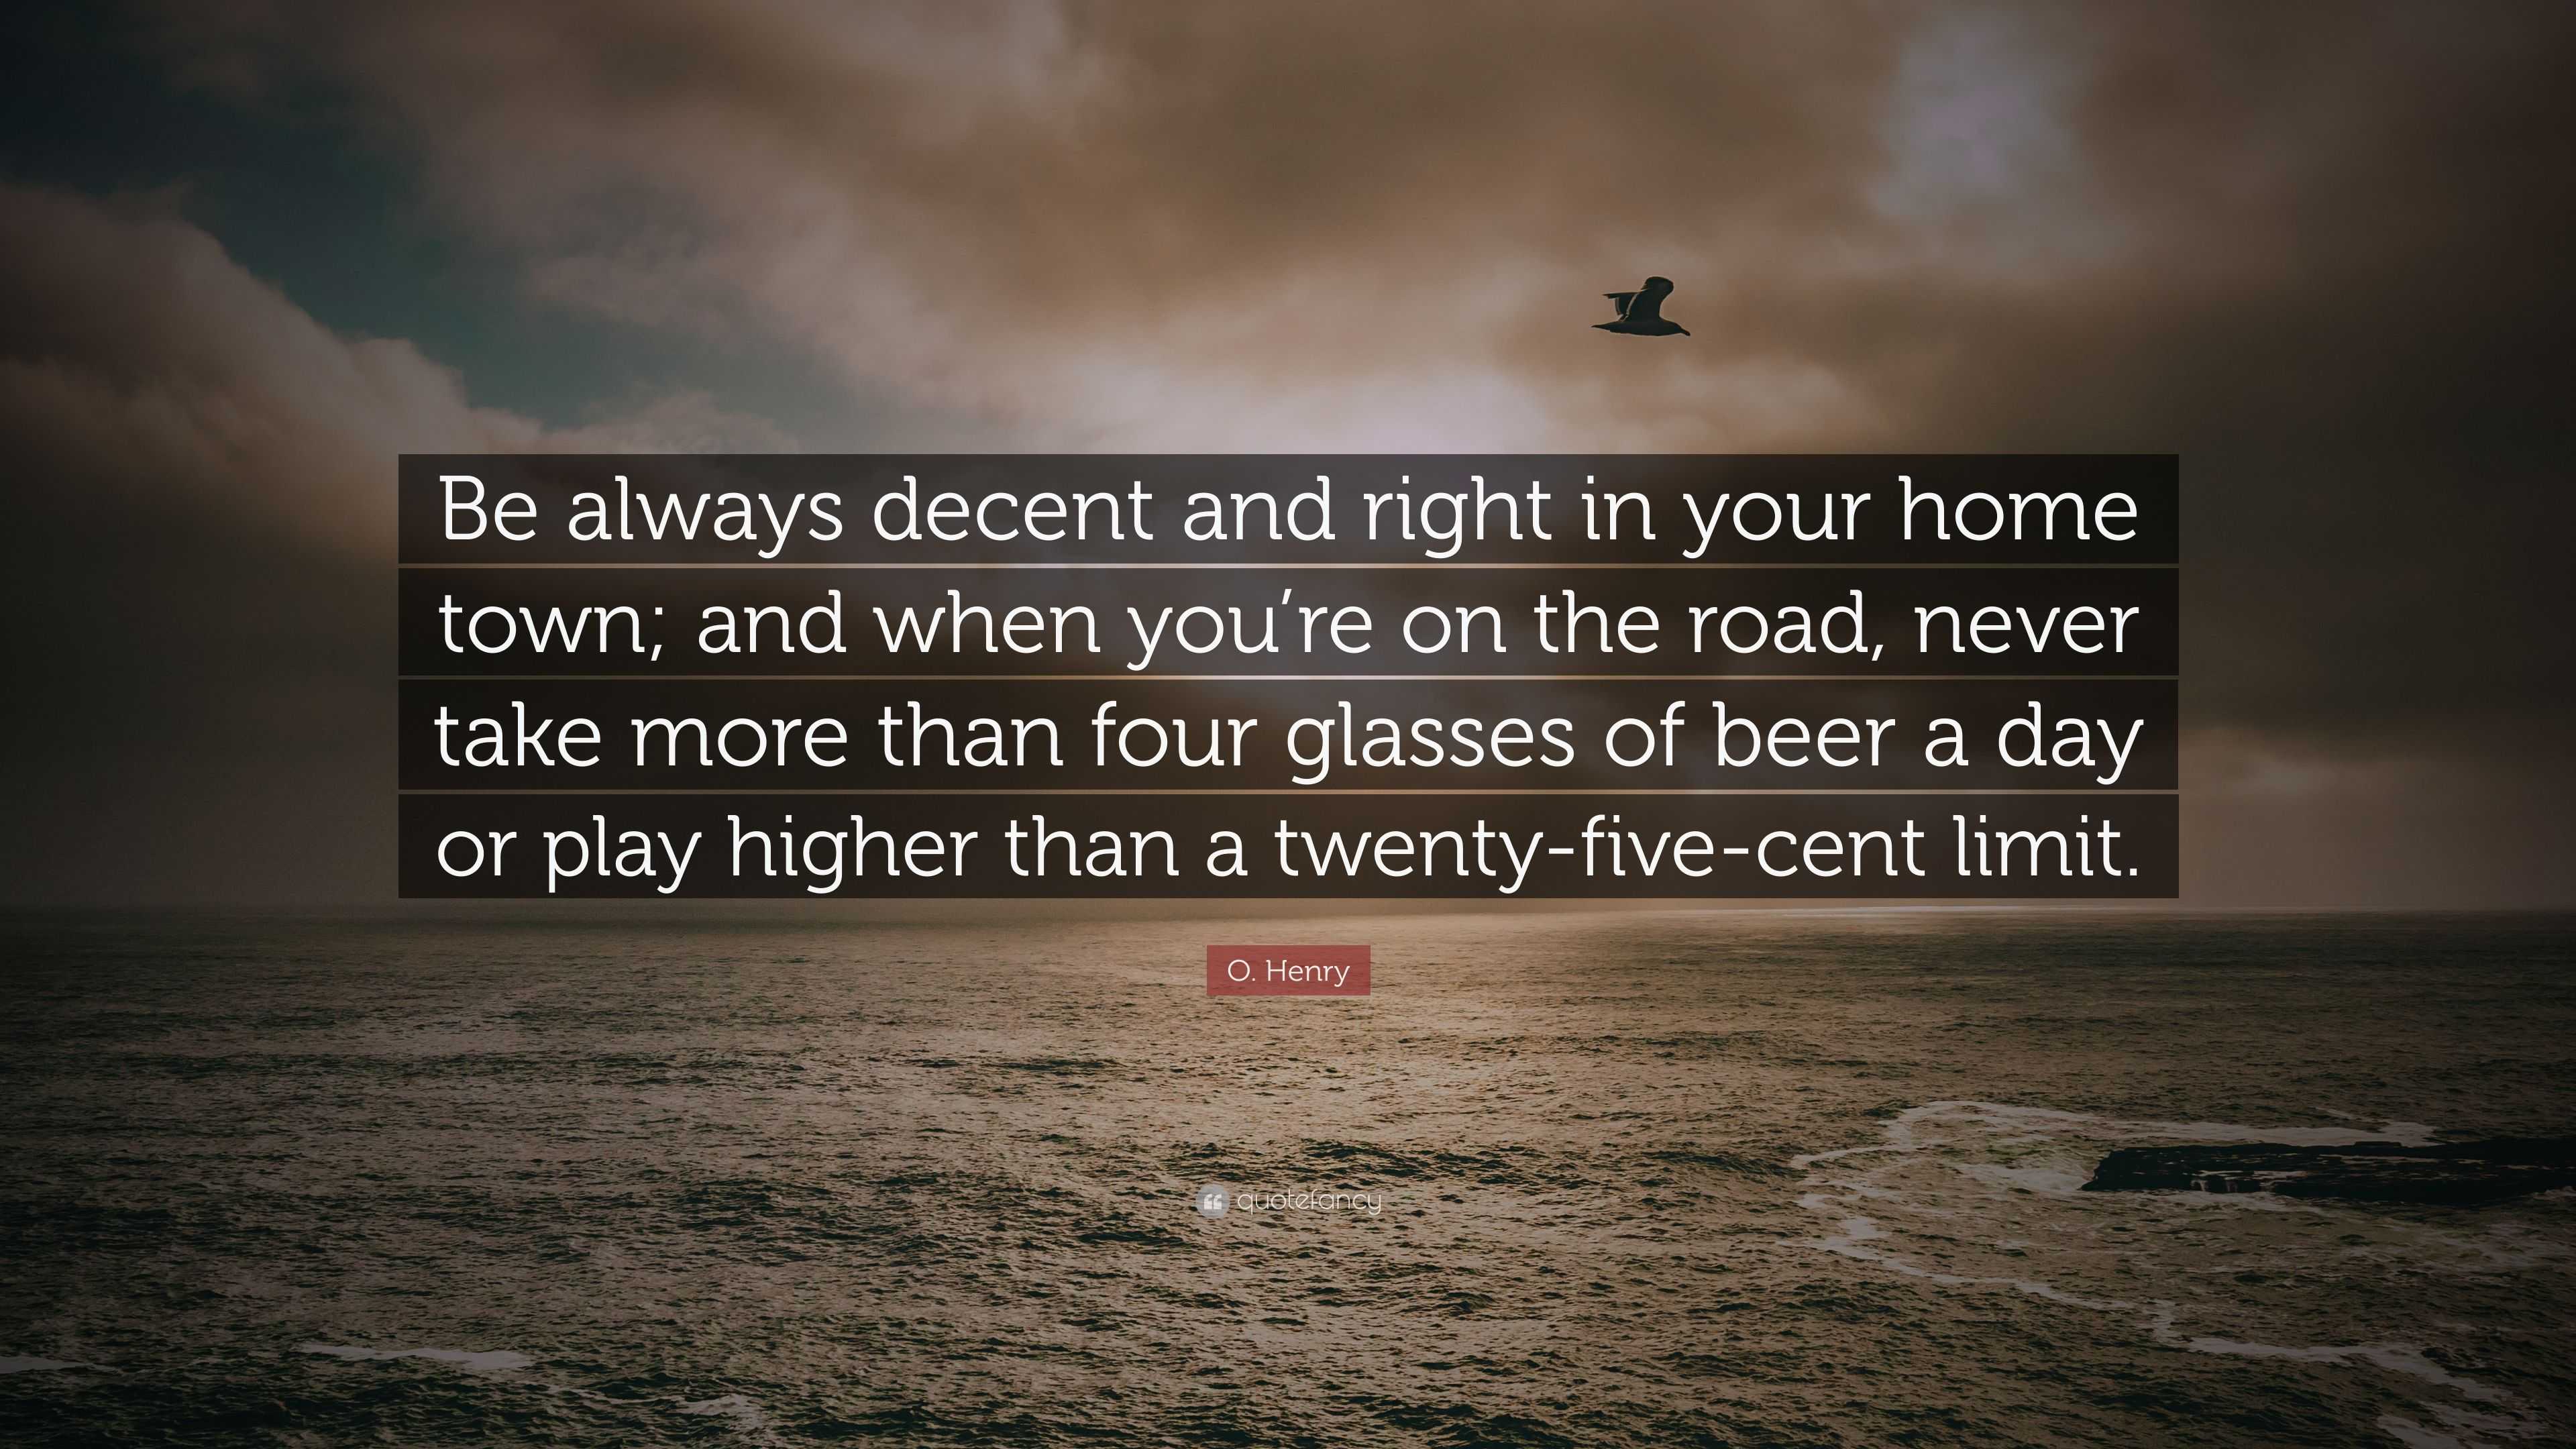 O. Henry Quote: “Be always decent and right in your home town; and